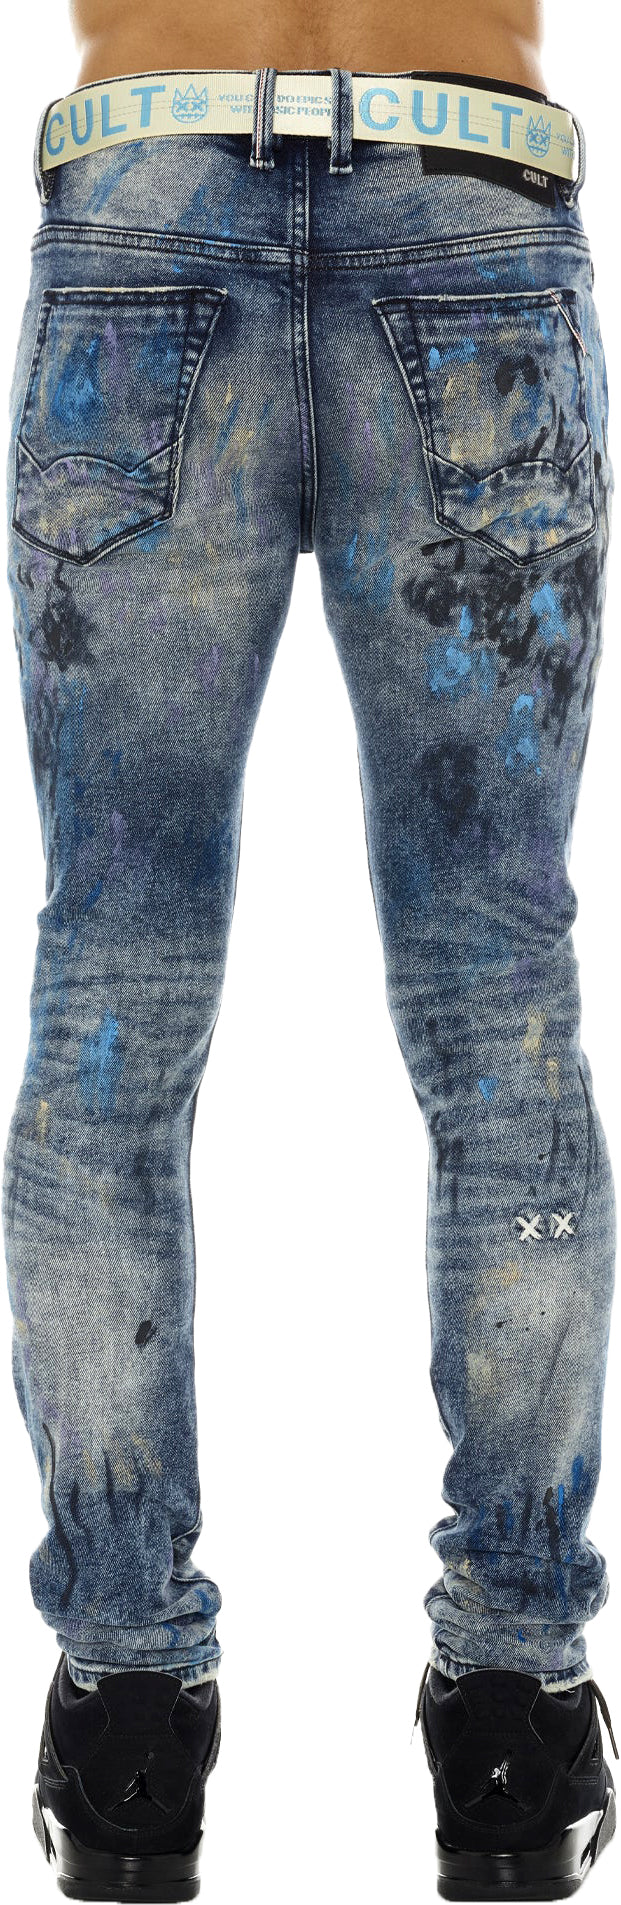 Men's "Abstract" Punk Super Skinny Stretch Jeans - Krush Clothing